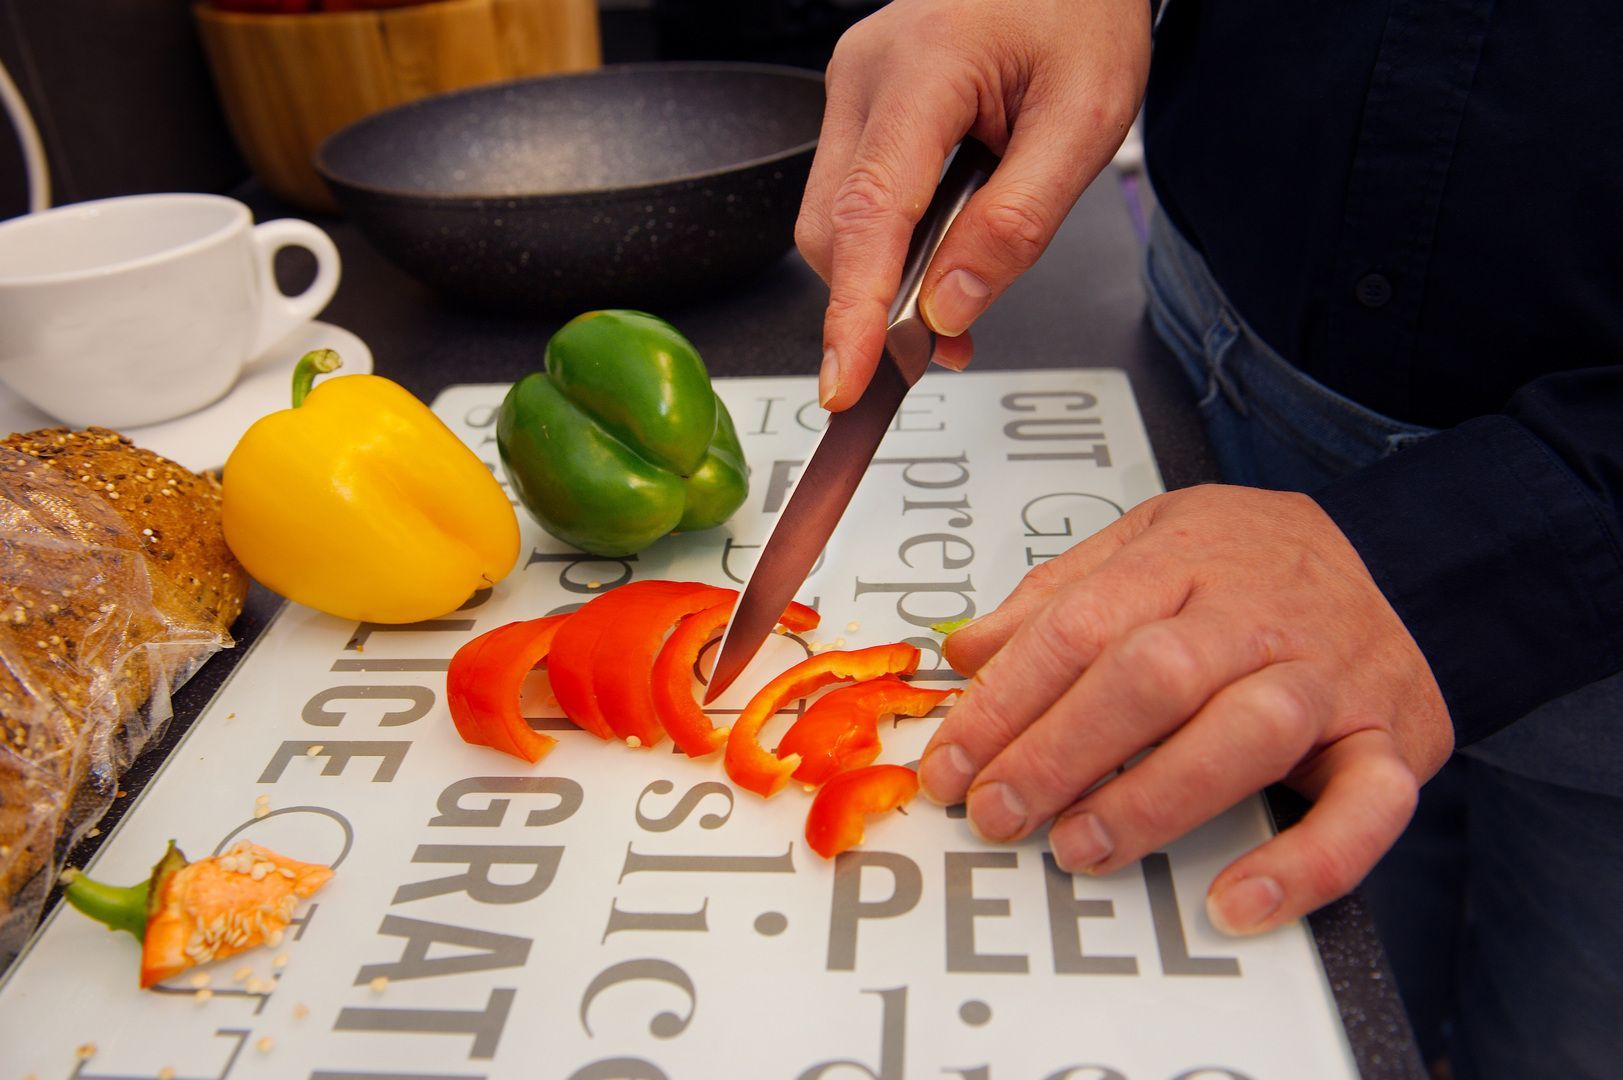 Philip Anderson preparing a bellpepper into neat slices.